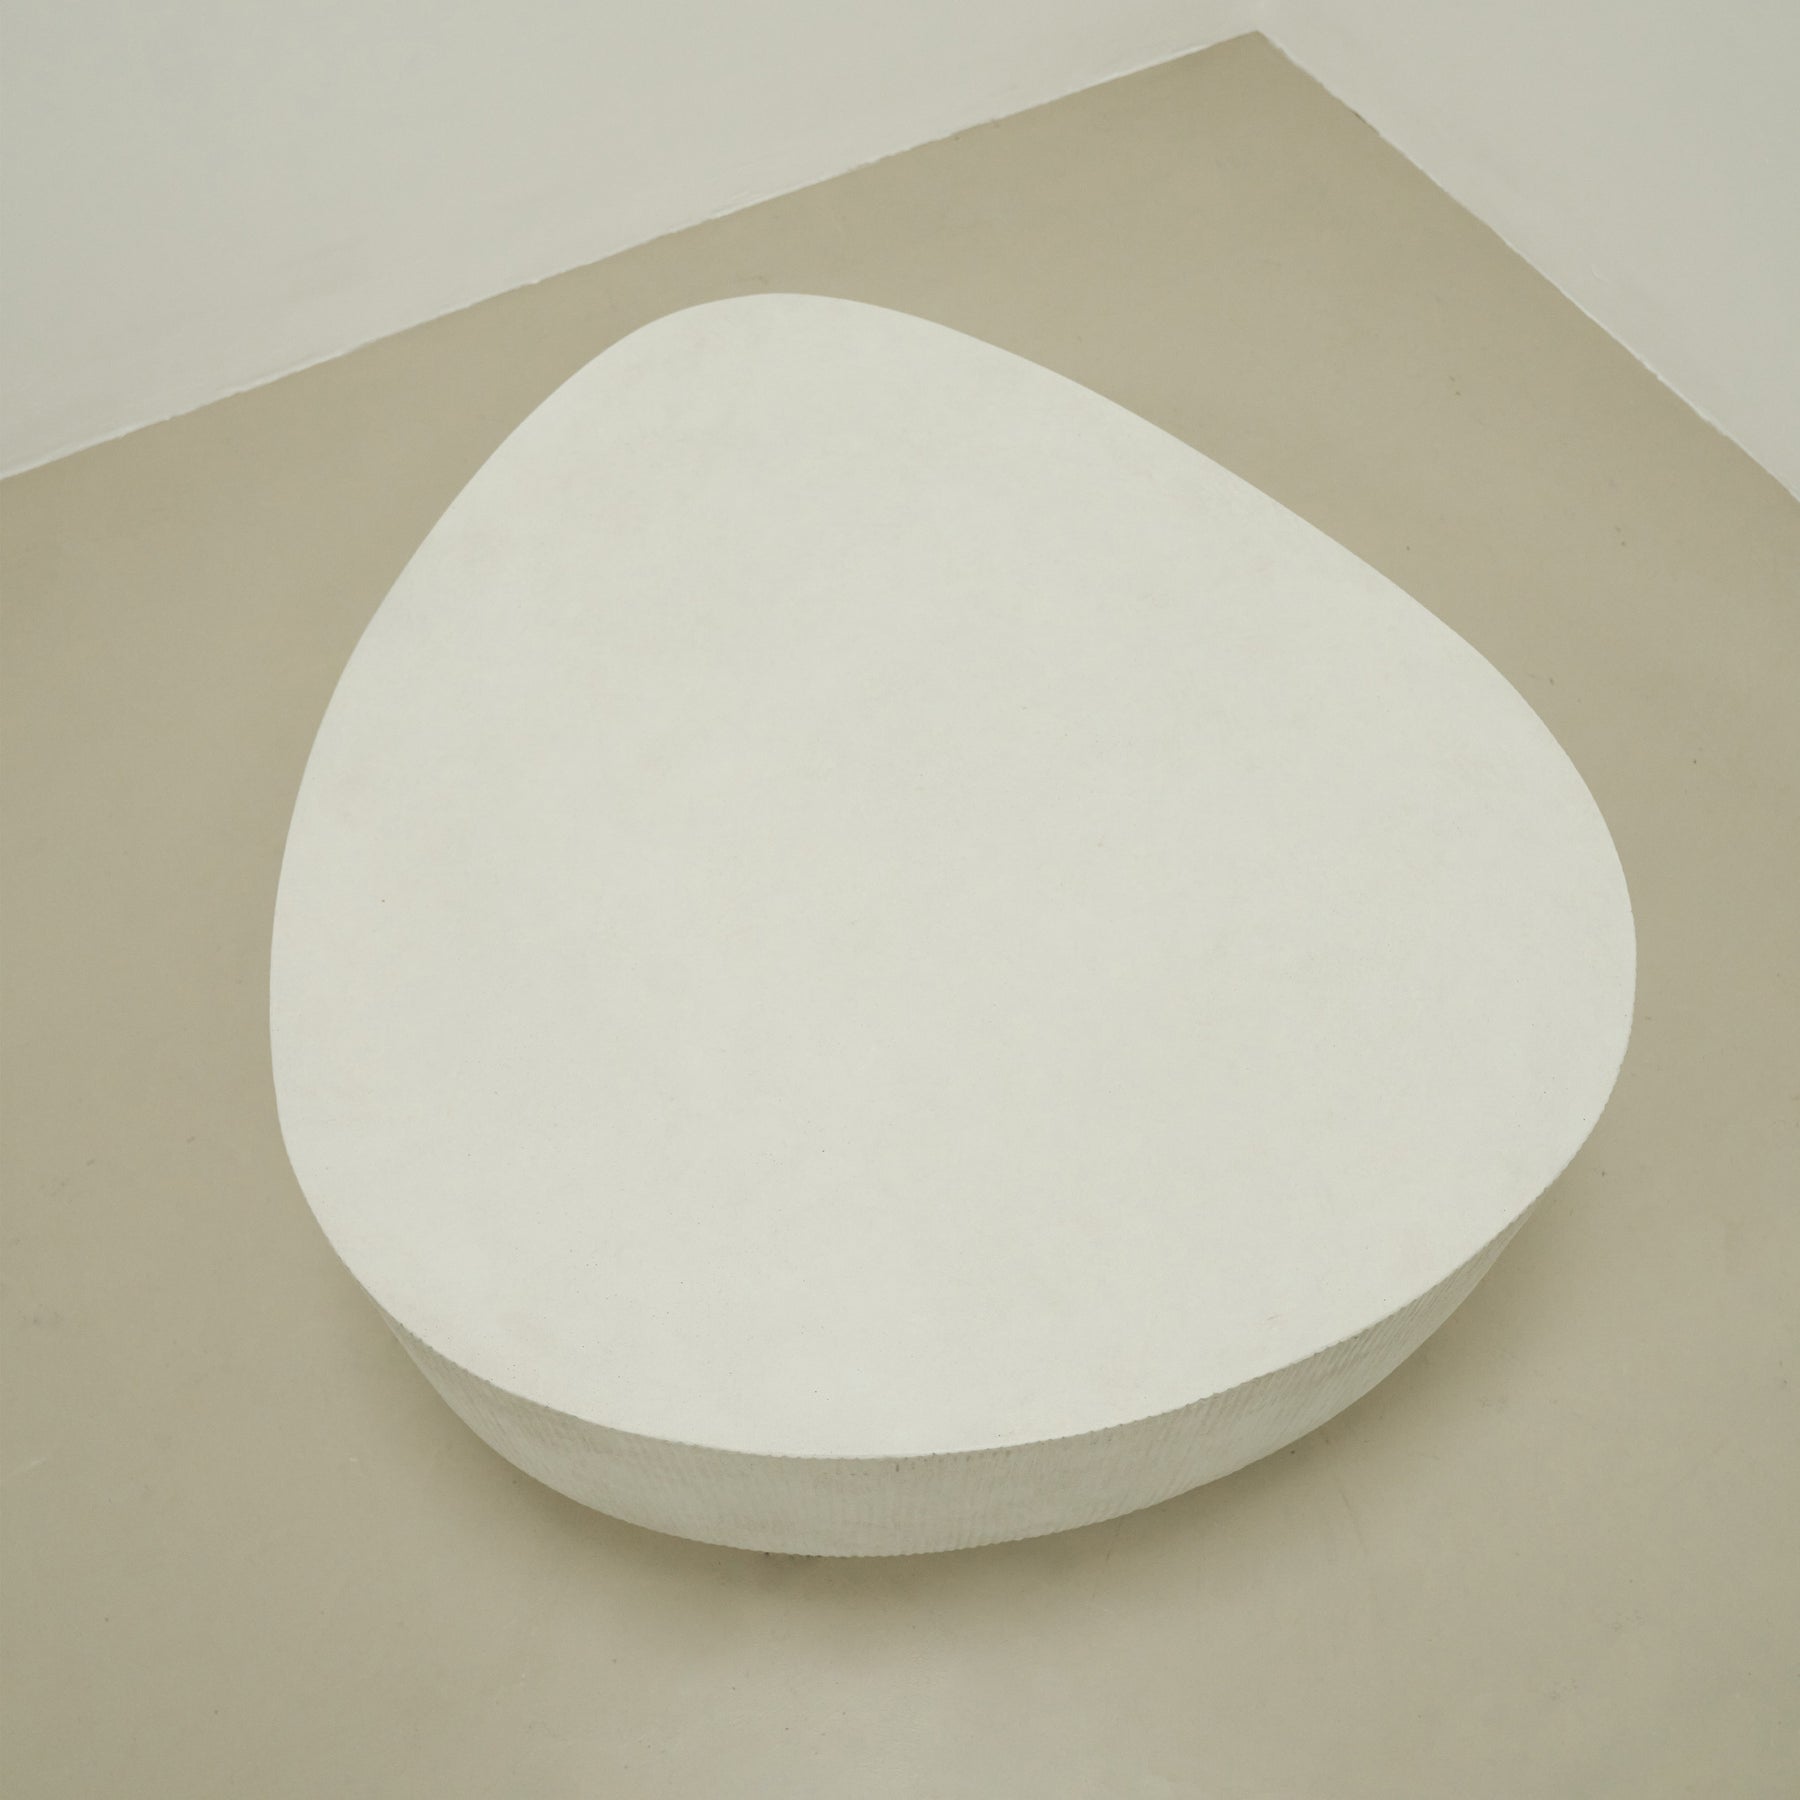 Top-down view of Minimal Concrete Irregular Shaped Coffee Table Large in muted room, empty